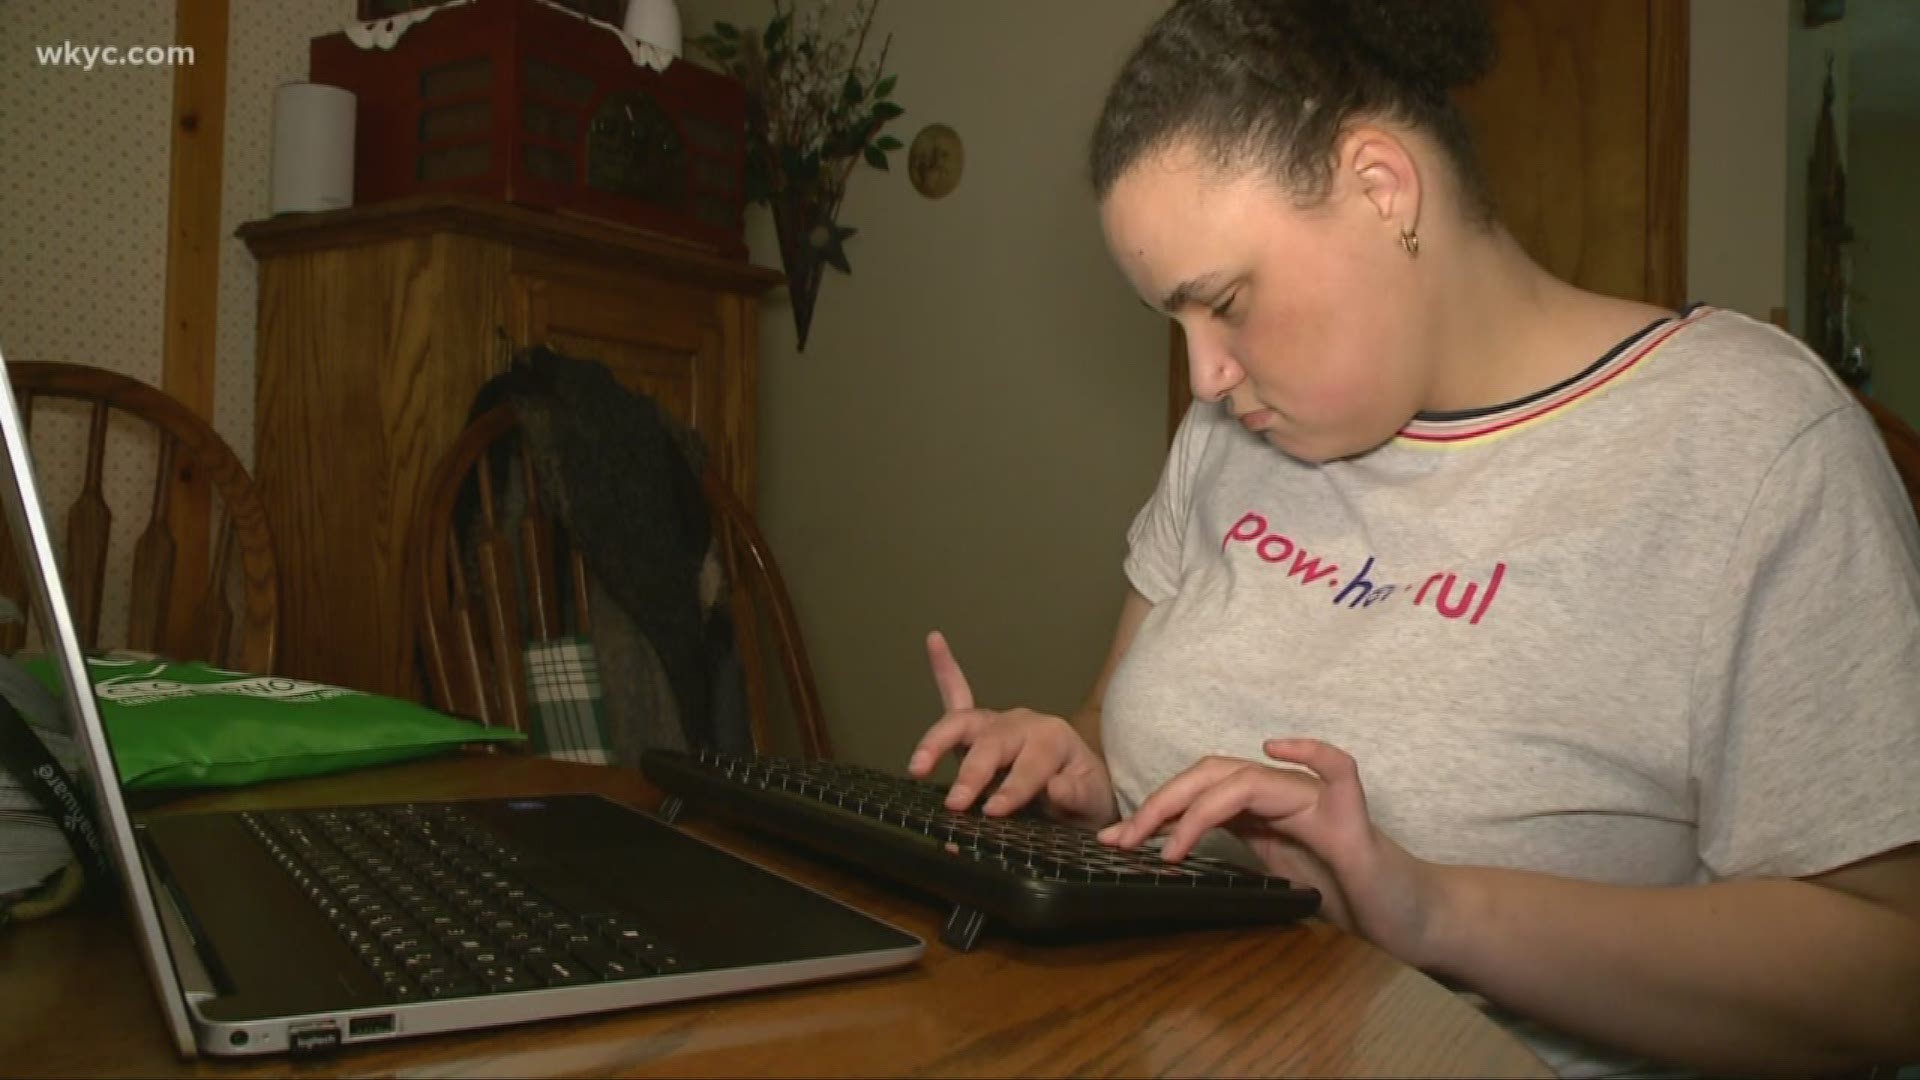 Cammie Gattuso was born blind, but her ability to read & write braille has taken her to many different cities to win competitions. Lindsay Buckingham reports.